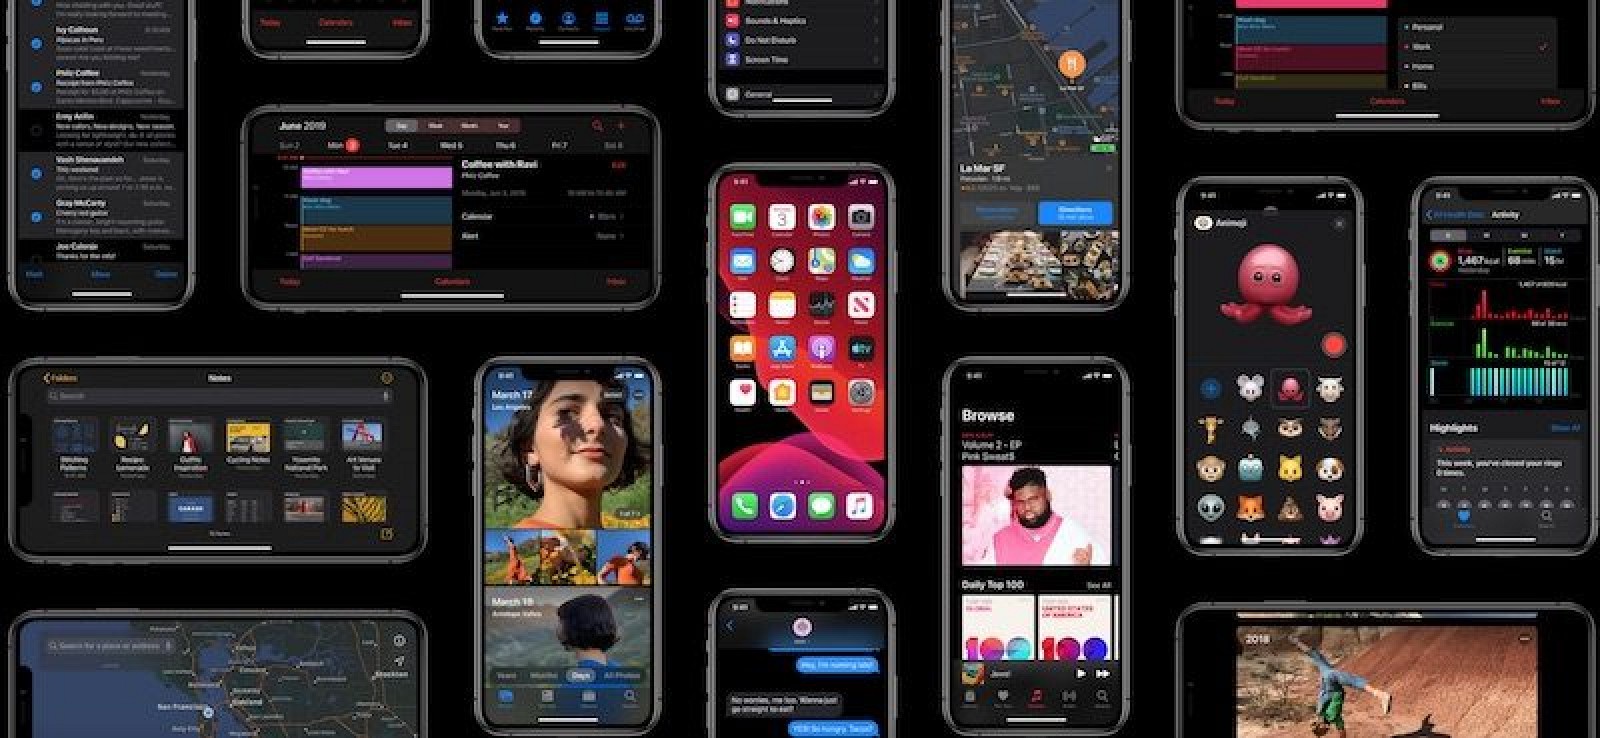 Apple Seeds Third Betas of iOS 13 and iPadOS to Developers